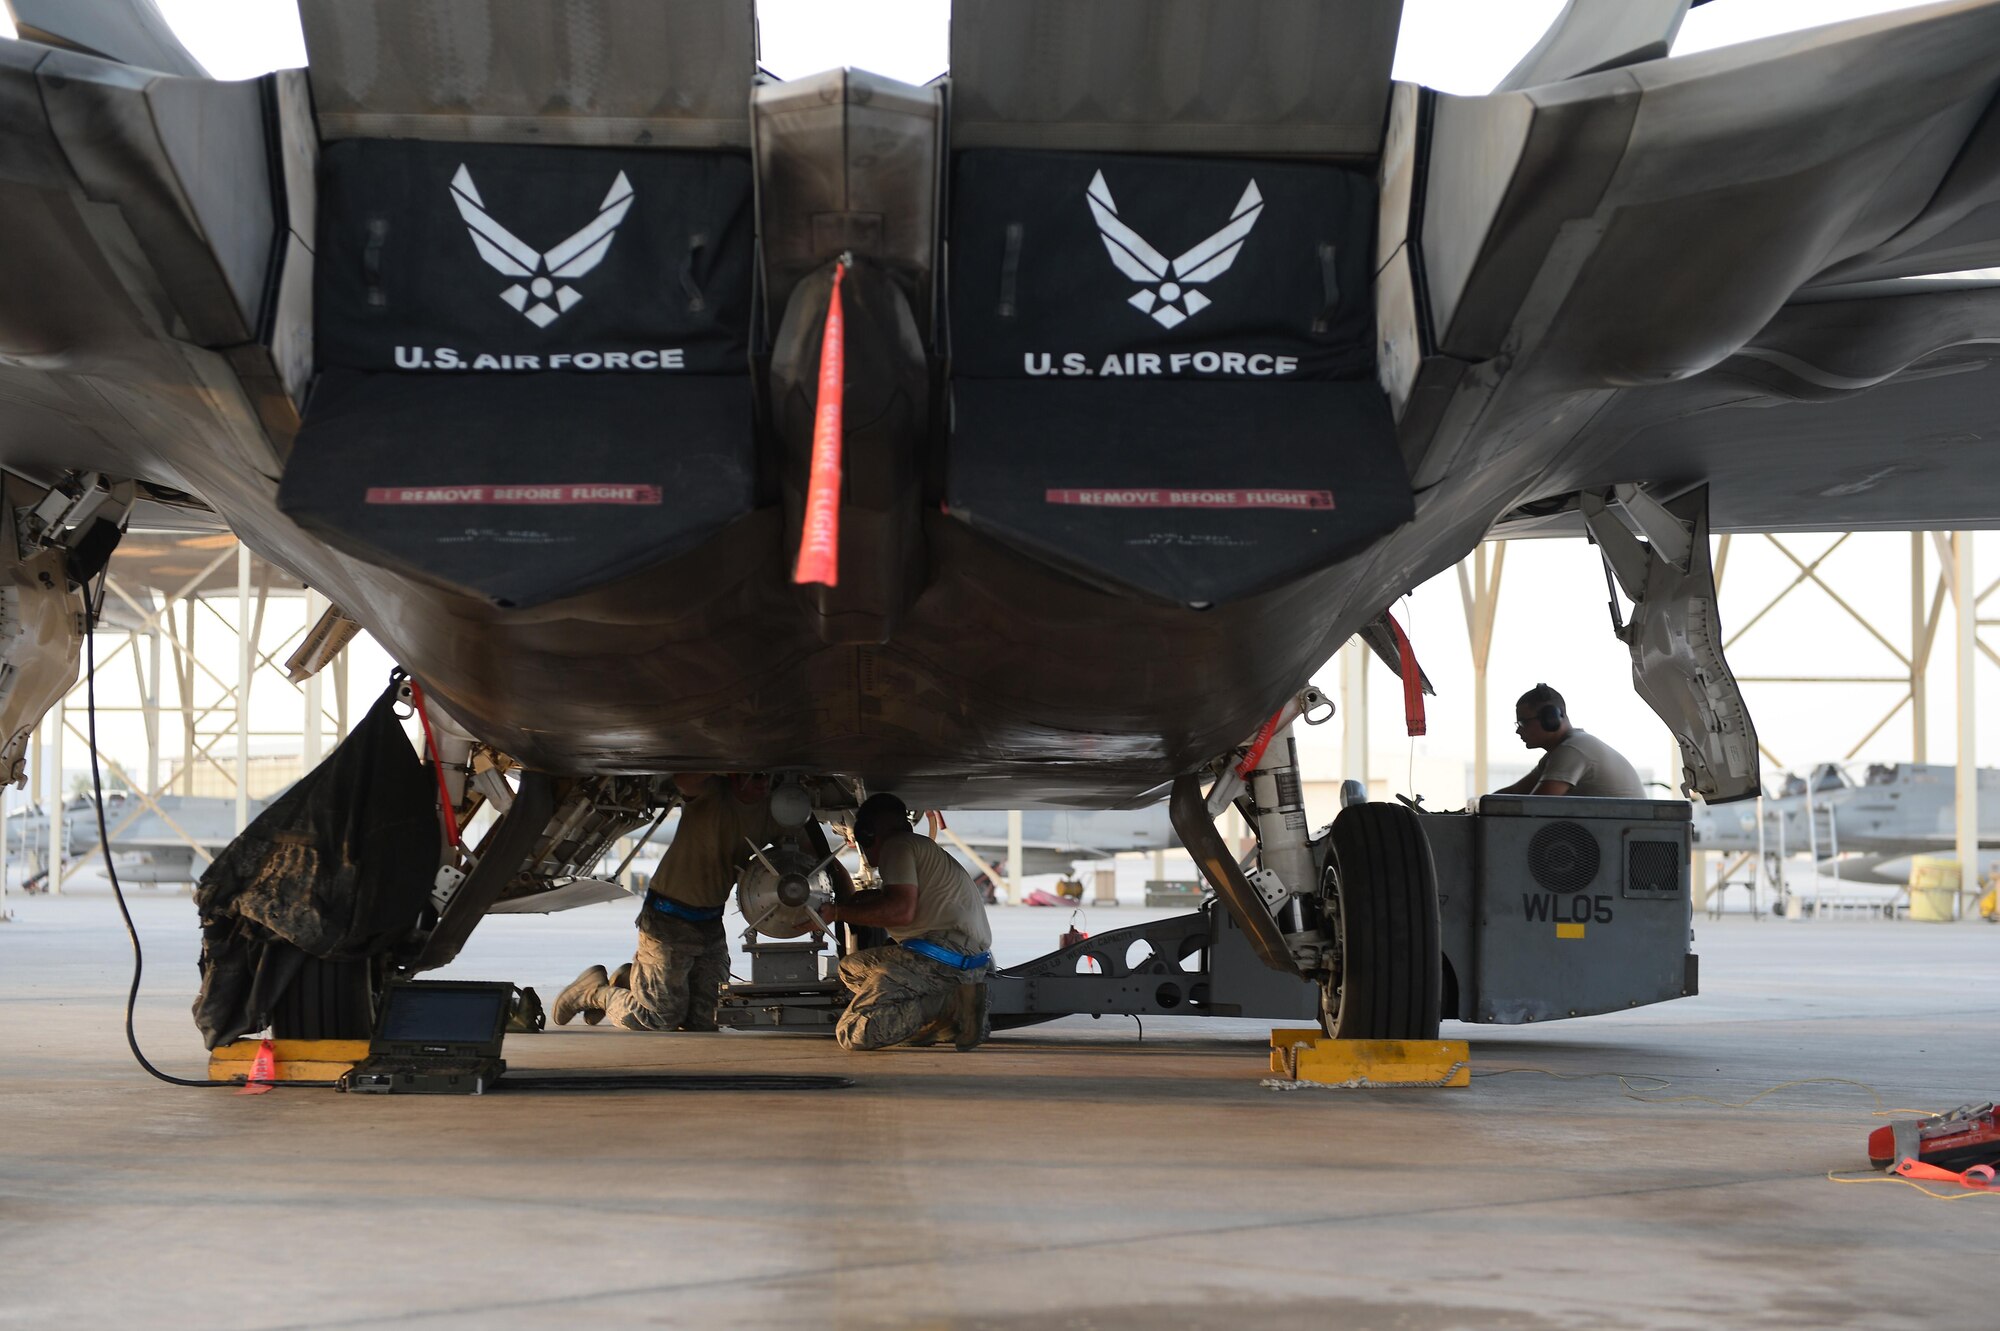 380th Expeditionary Maintenance Airmen prepare to load munitions on an F-22 Raptor at an undisclosed location in Southwest Asia, August 30, 2015. The F-22’s combination of sensor capability, integrated avionics, situational awareness, and weapons provides first-kill opportunity against threats. (U.S. Air Force photo illustration/ Staff Sgt. Sandra Welch)